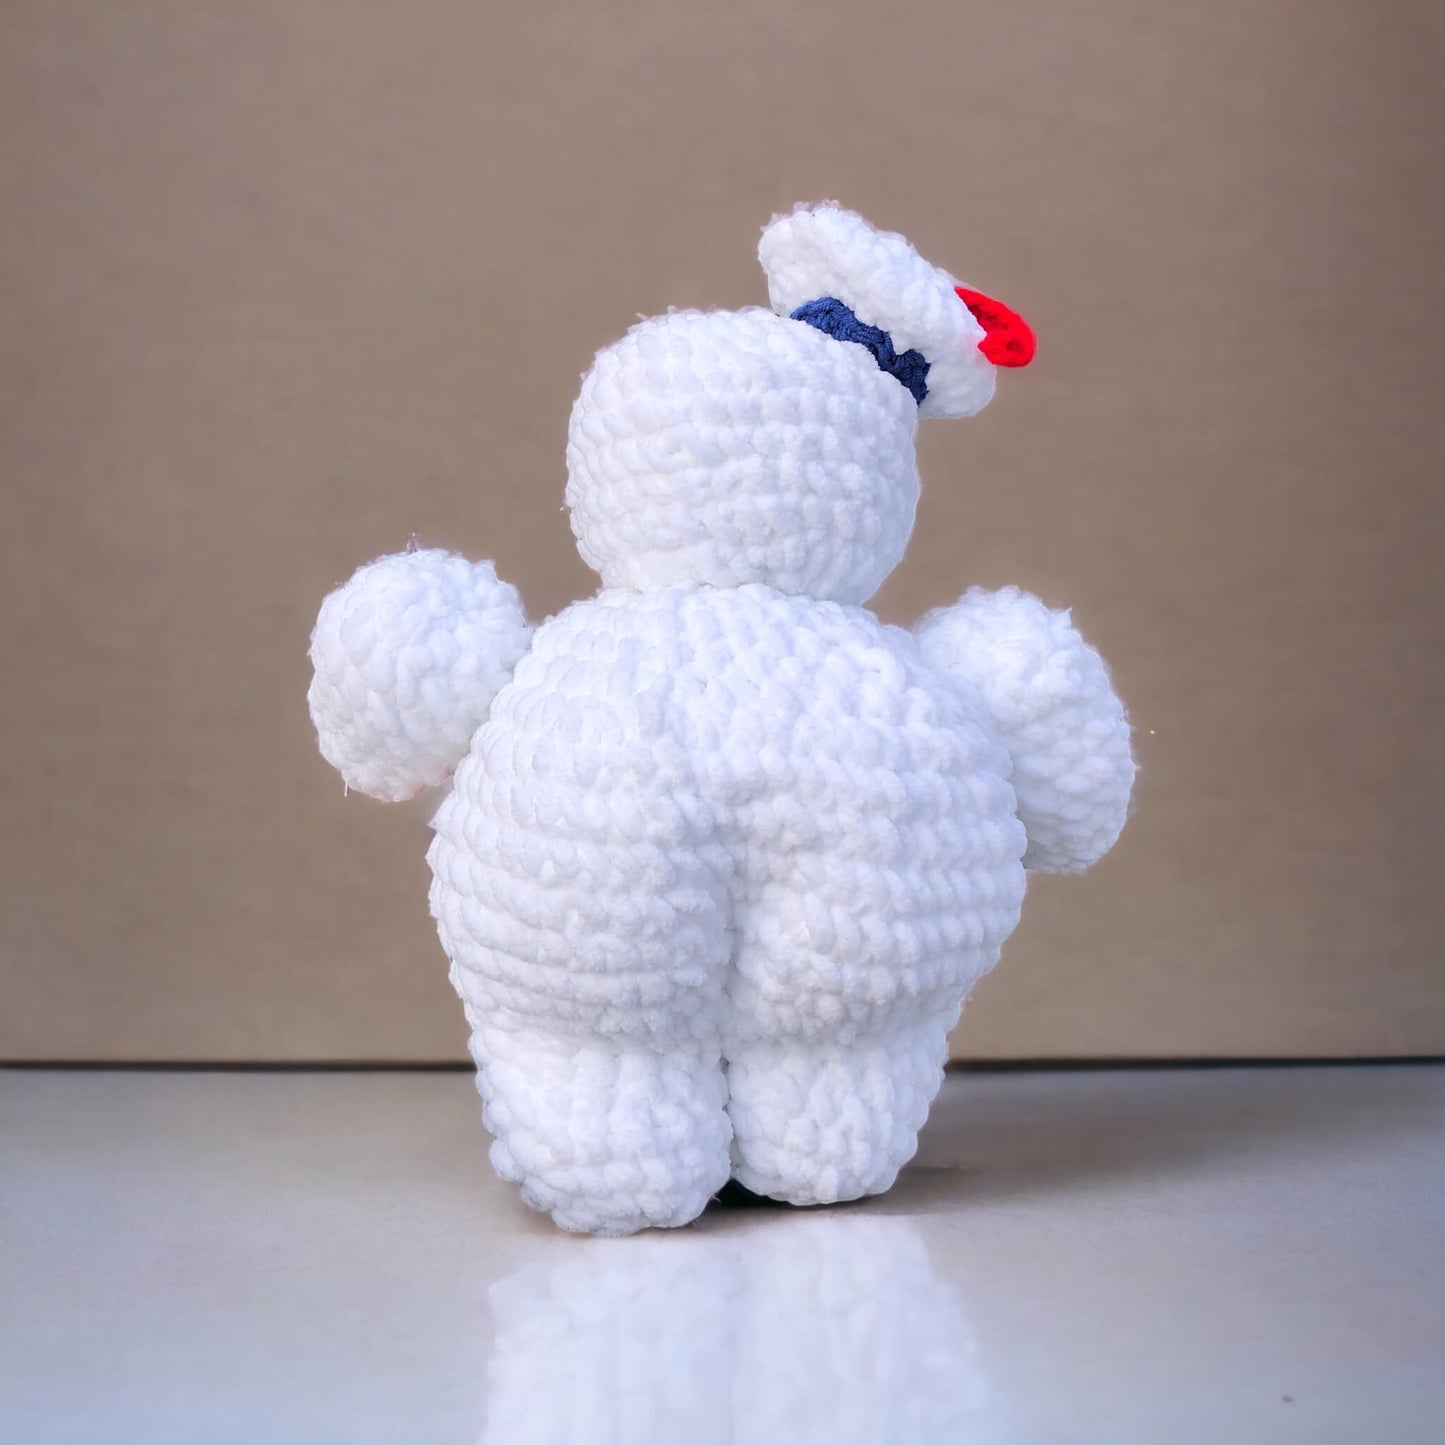 PATTERN: Crochet Ghostbusters mini puft with chunky buns